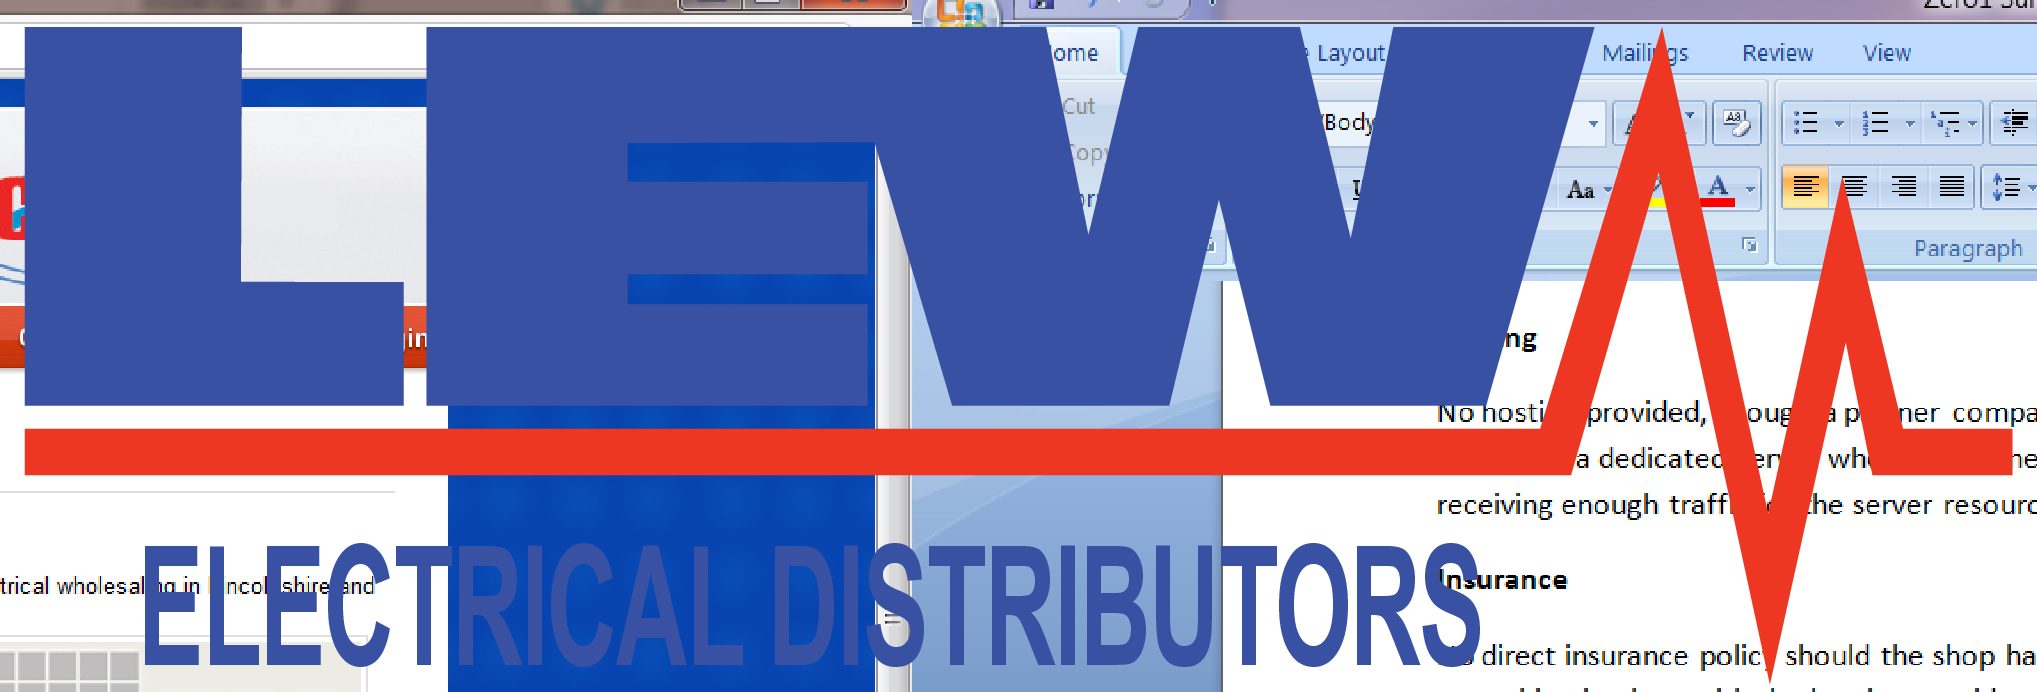 LEW Electrical Distributors, Best Electrical Wholesaler (6-25 Branches)